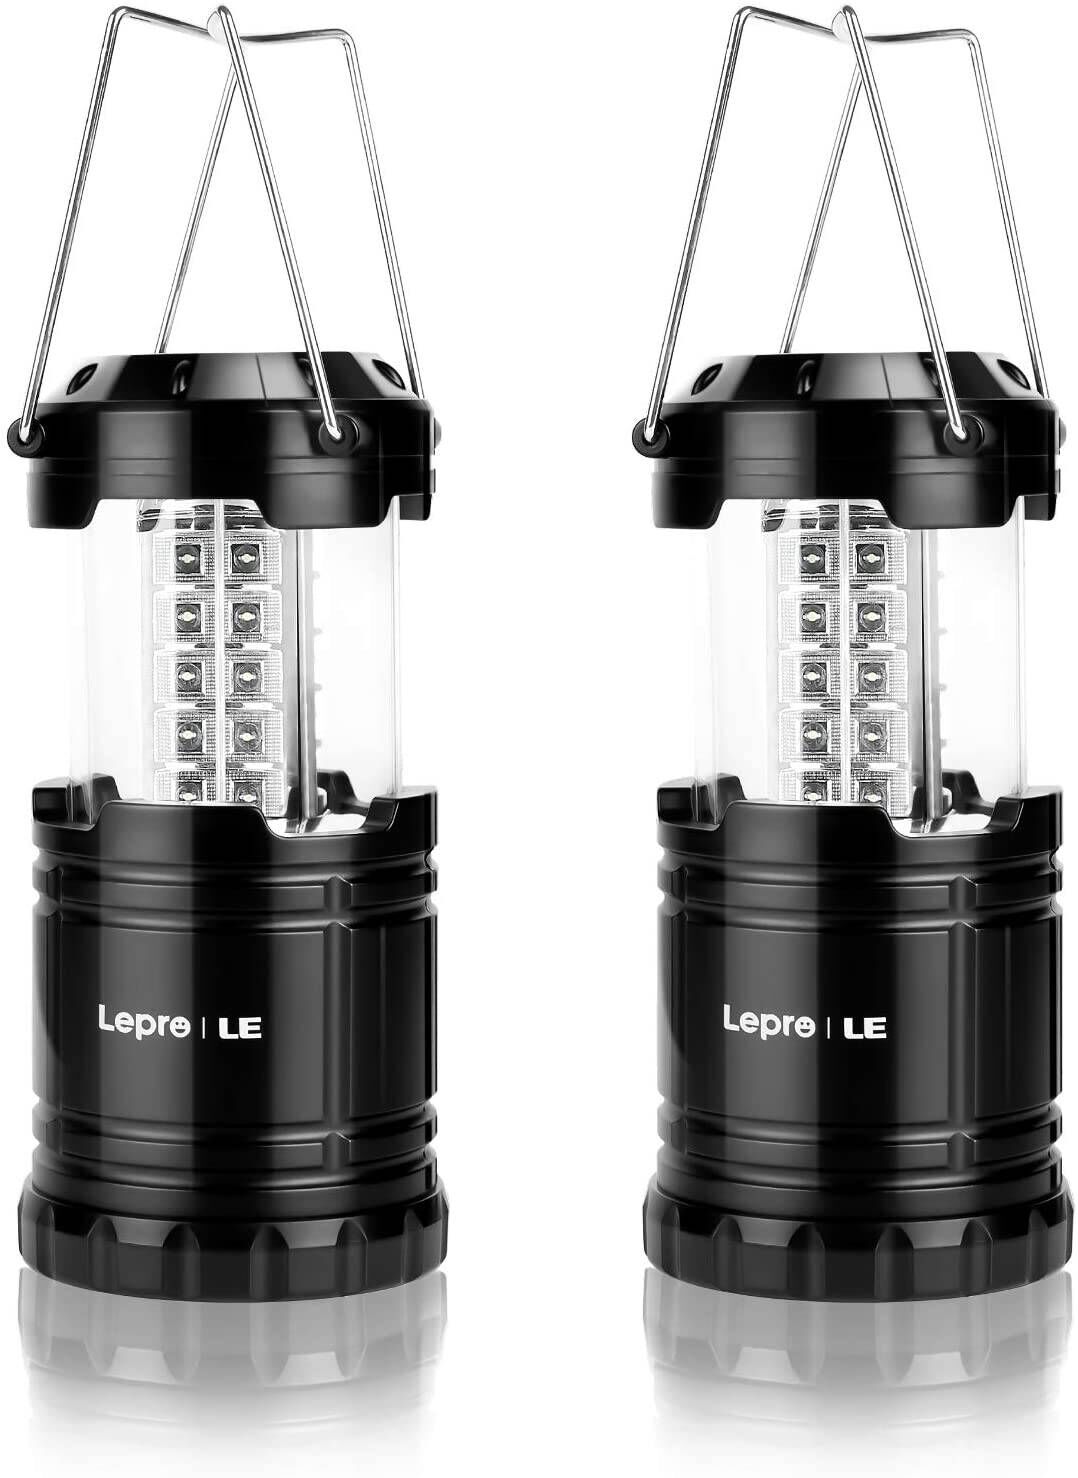 Vont LED Camping Lantern Review 